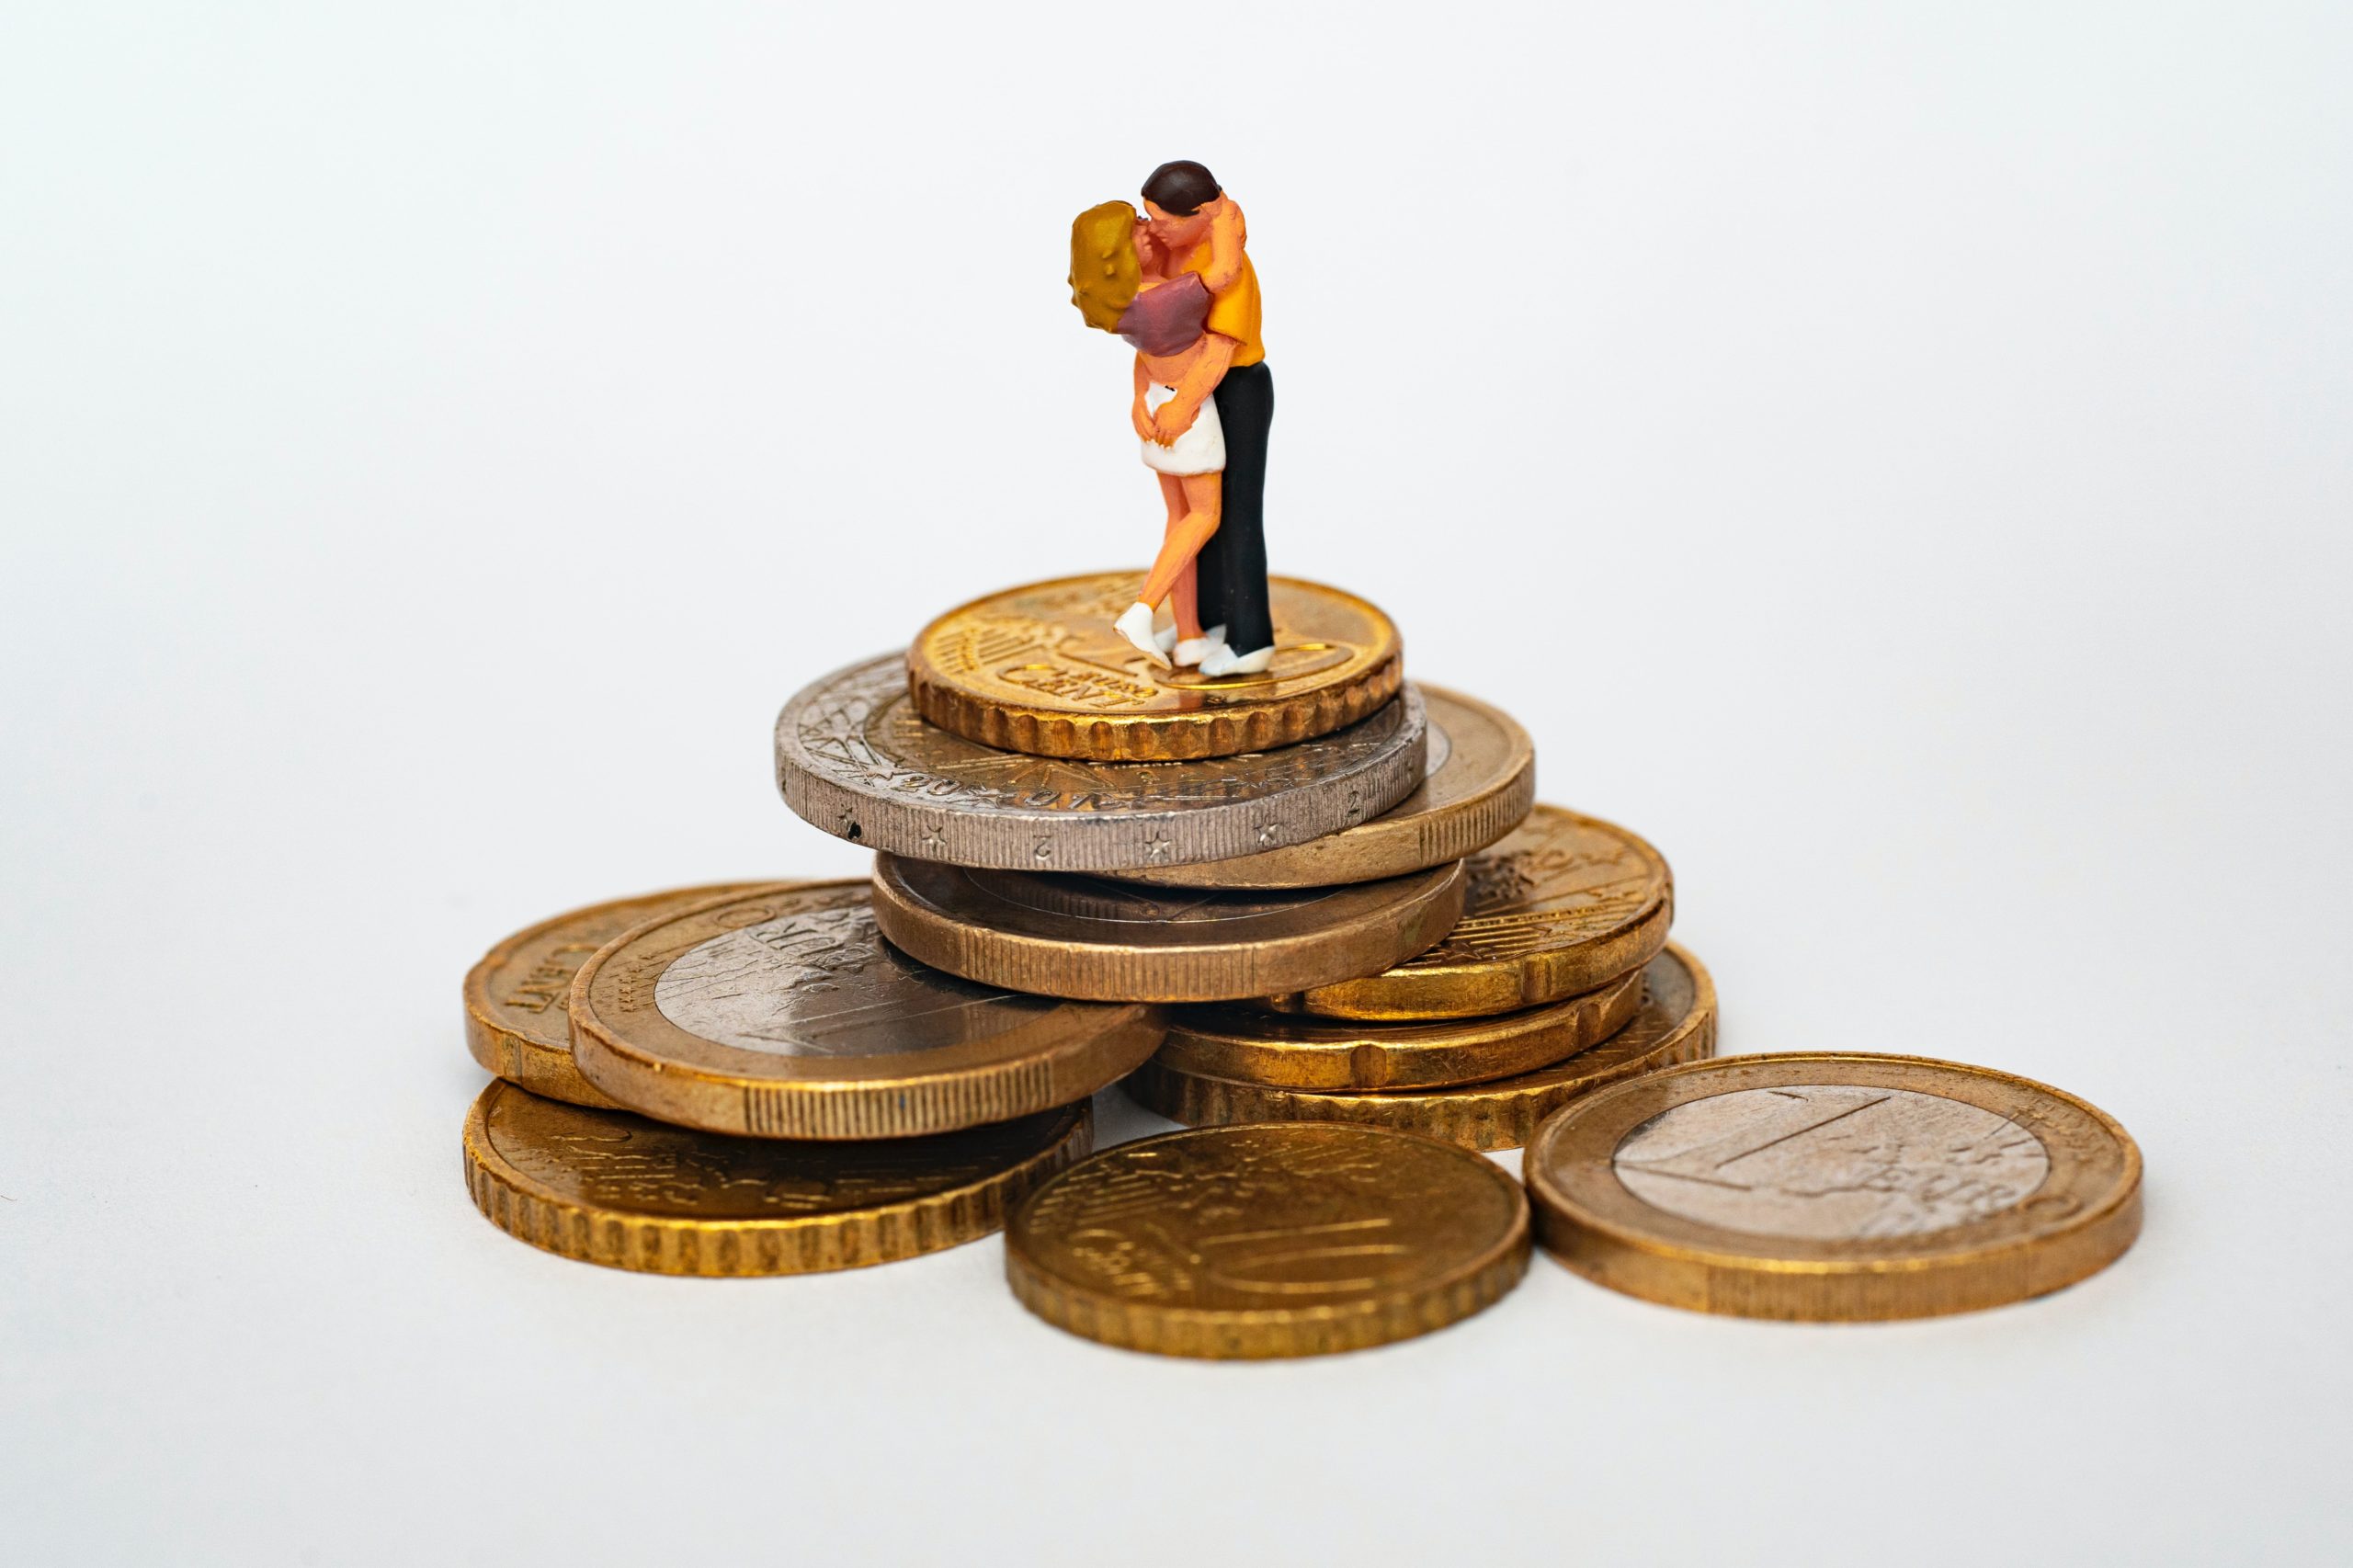 Money Habits of Couples: How to Stay on Top of Your Finances as a Team